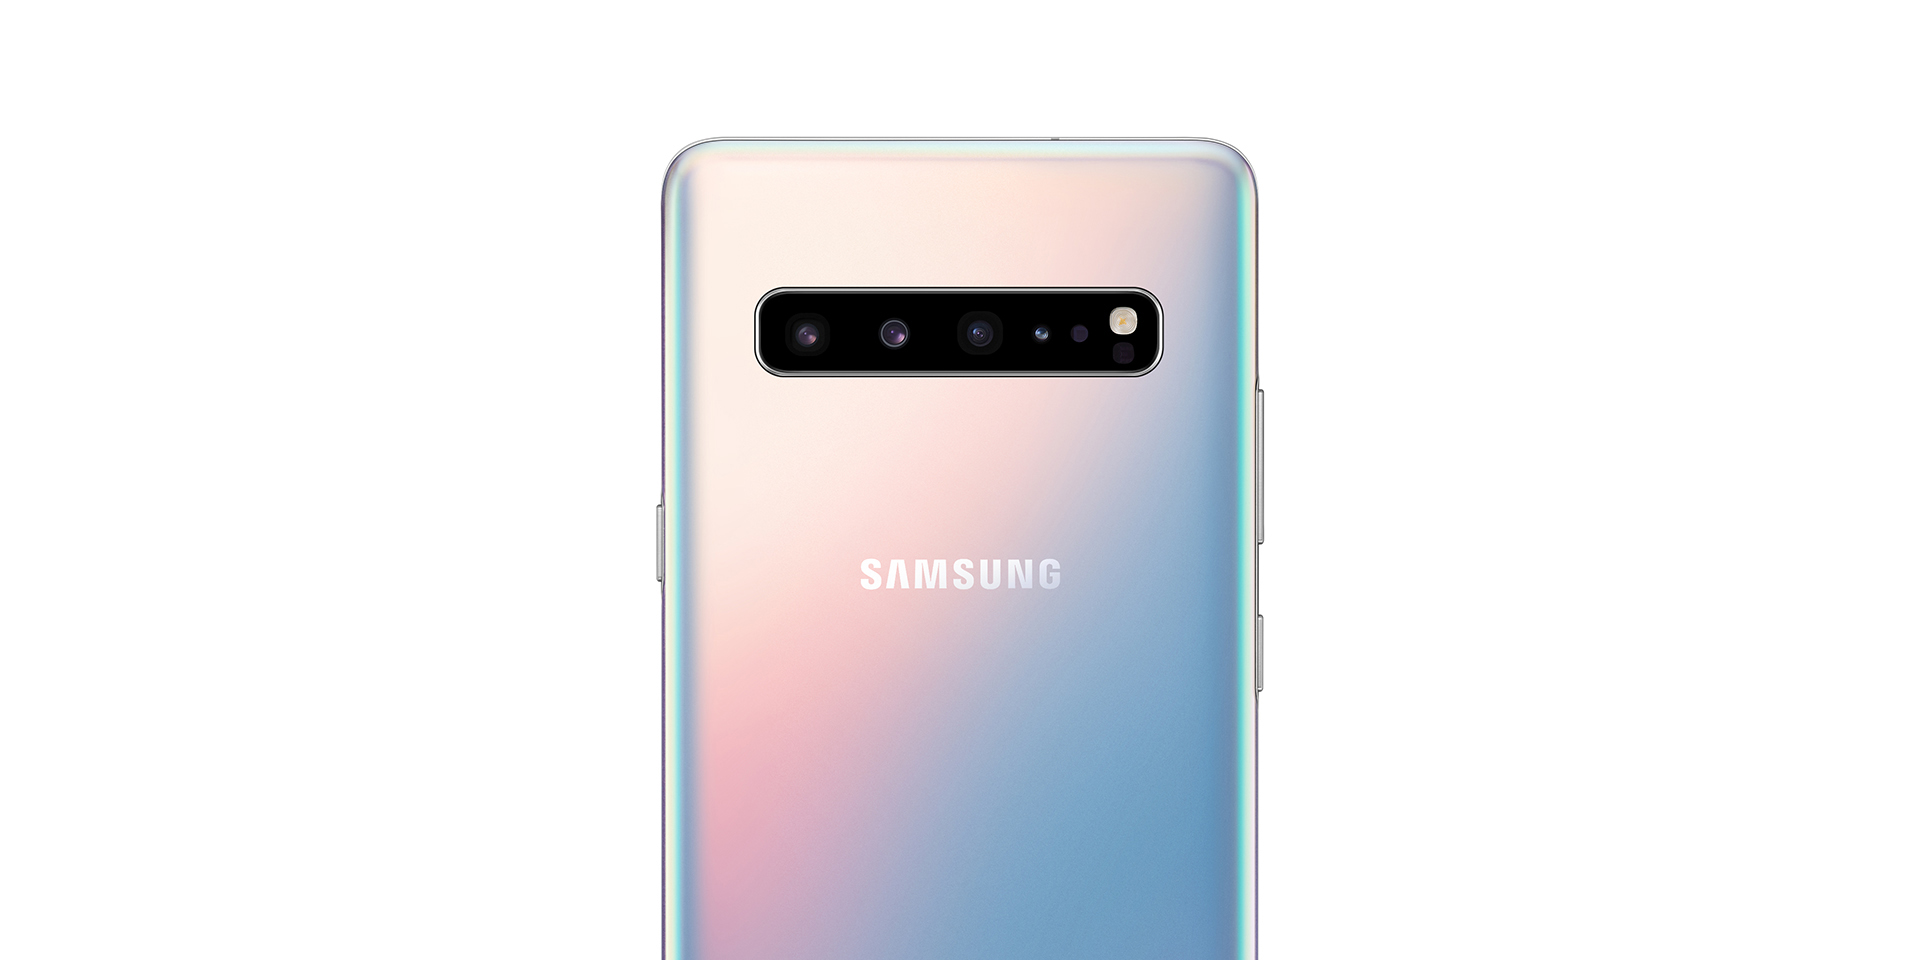 Galaxy S10 5G price, pre-orders, and 5G Note 10 confirmed - 9to5Google